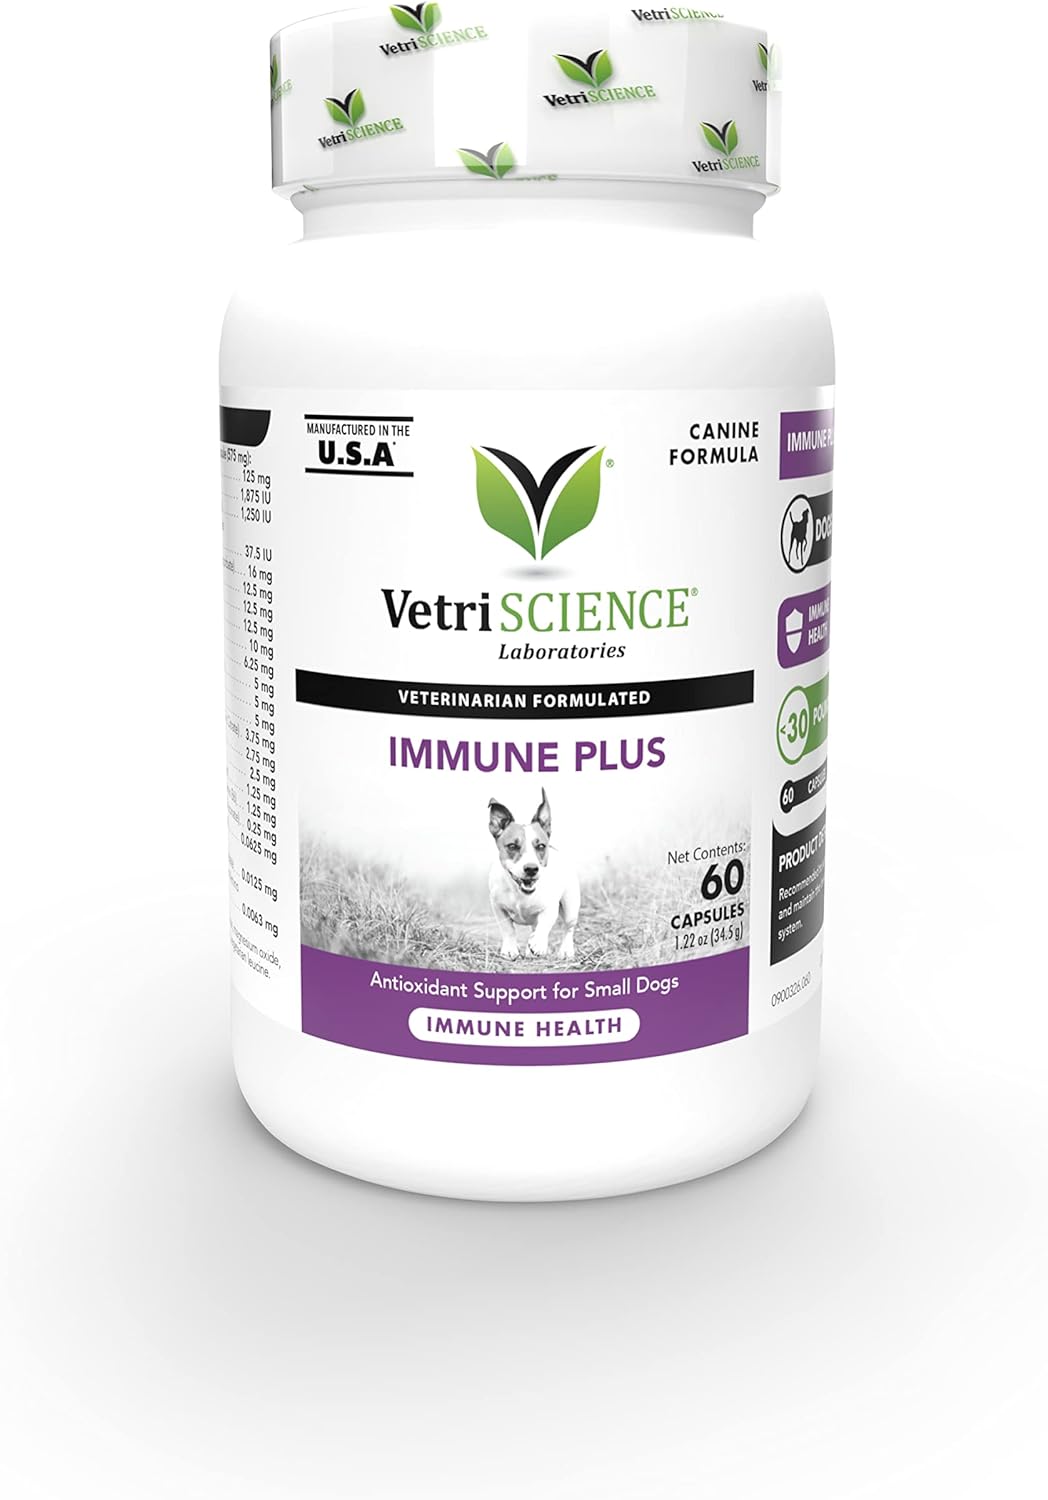 VetriScience Immune Plus Immunity Support for Small Dogs, 60 Capsules – Immune and Allergy Support Supplement for Dogs Under 30 Pounds - Formerly Cell Advance 440